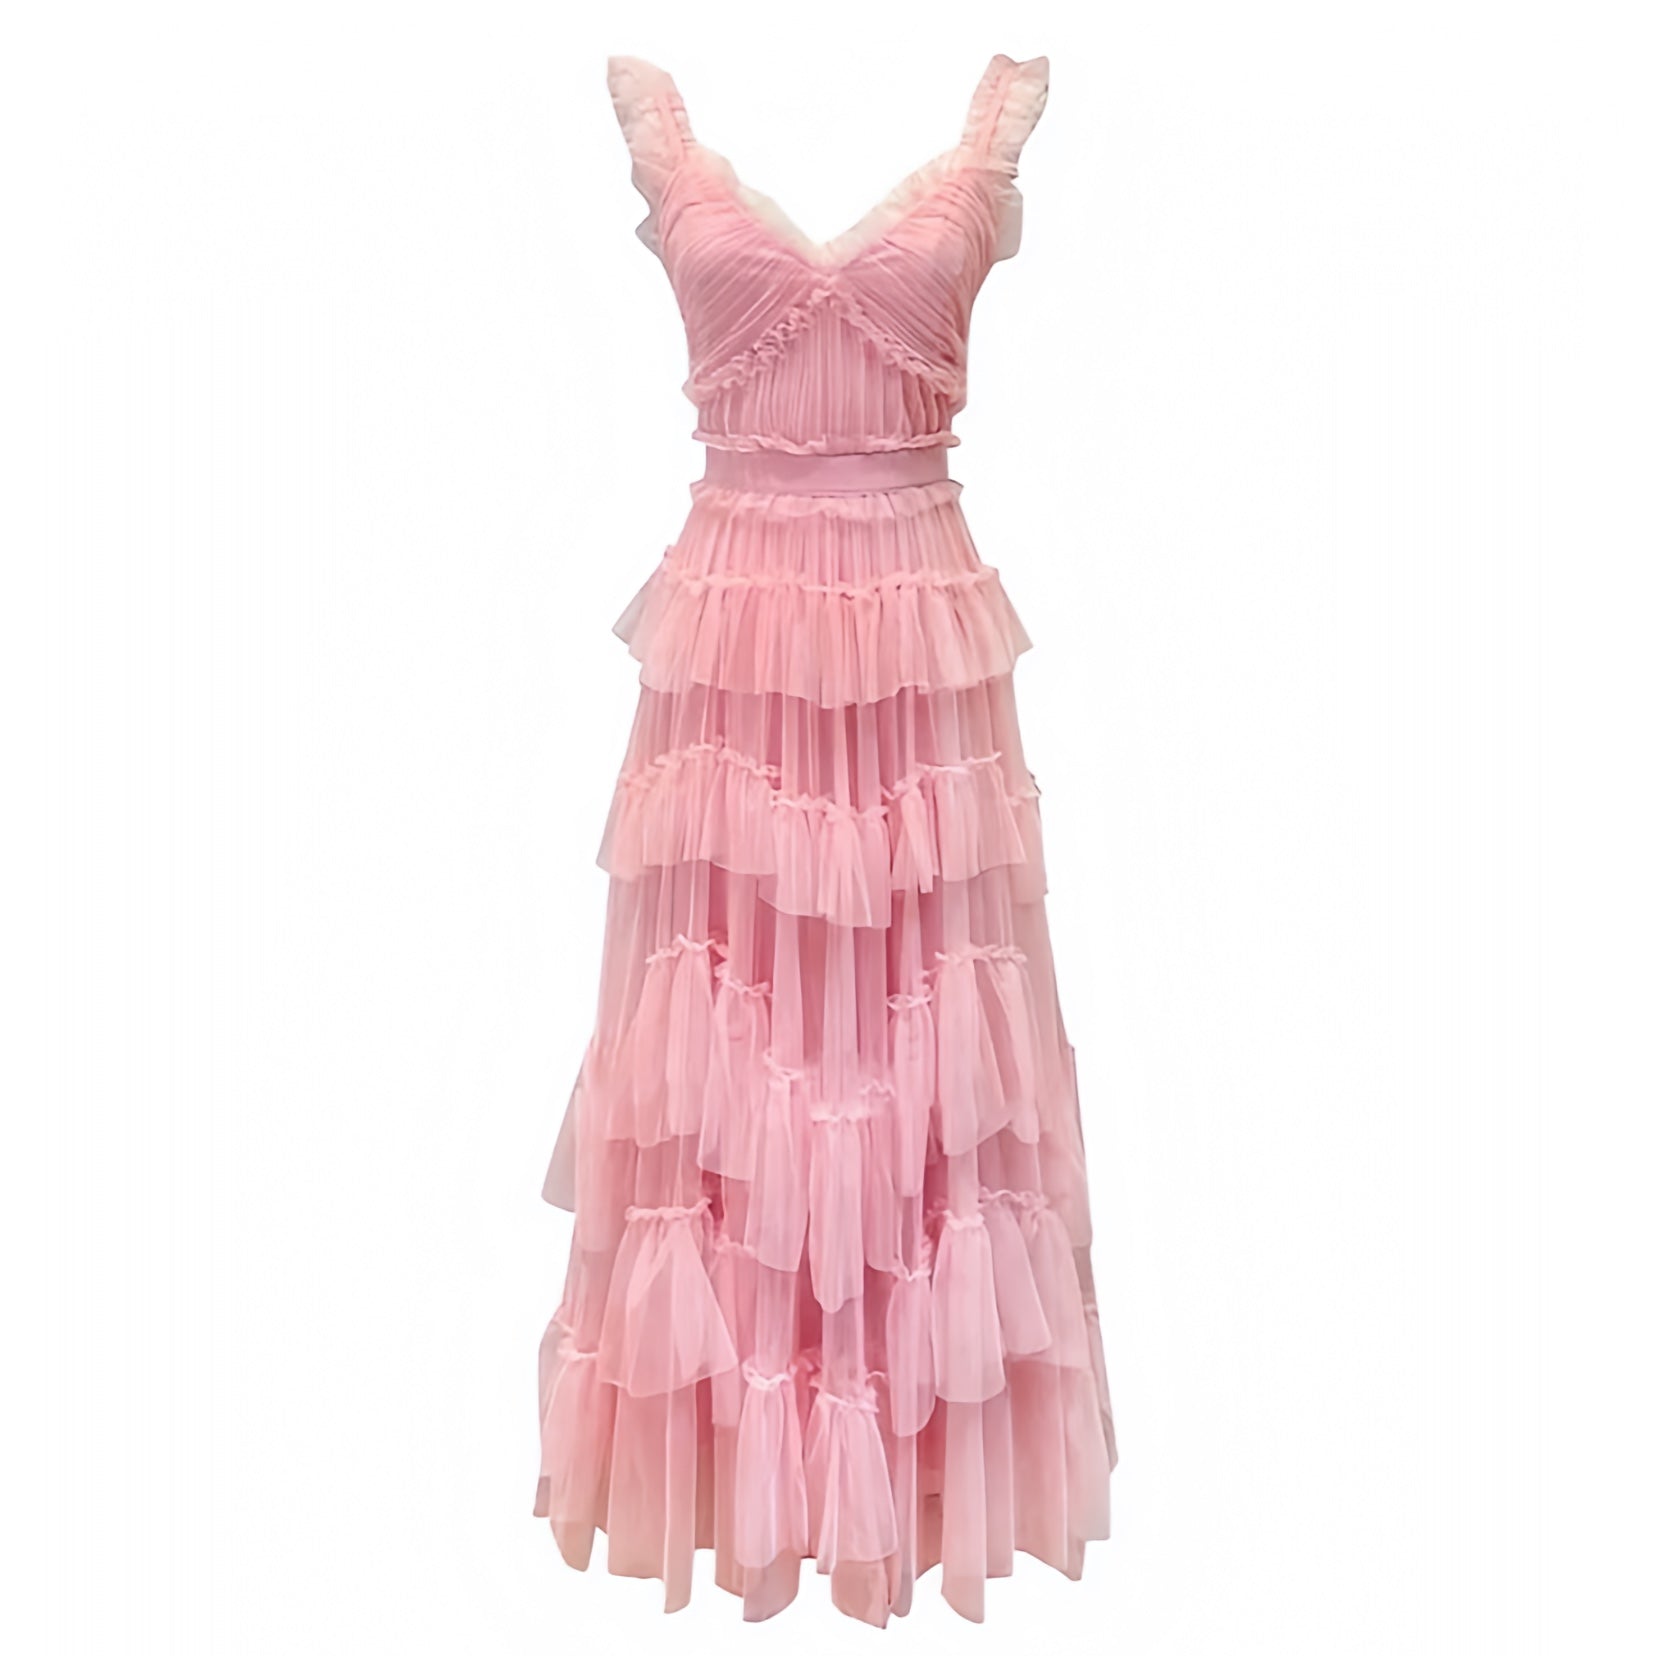 light-pink-layered-ruffle-trim-feathered-ruched-bodycon-slim-fitted-bodice-drop-waist-mesh-translucent-fit-and-flare-sweetheart-neckline-spaghetti-strap-sleeveless-short-sleeve-backless-open-back-flowy-tiered-midi-long-maxi-dress-ball-gown-couture-women-ladies-chic-trendy-spring-2024-summer-semi-formal-elegant-classy-casual-feminine-prom-gala-debutante-wedding-guest-party-beach-vacation-sundress-preppy-style-altard-state-zimmerman-revolve-loveshackfancy-dupe